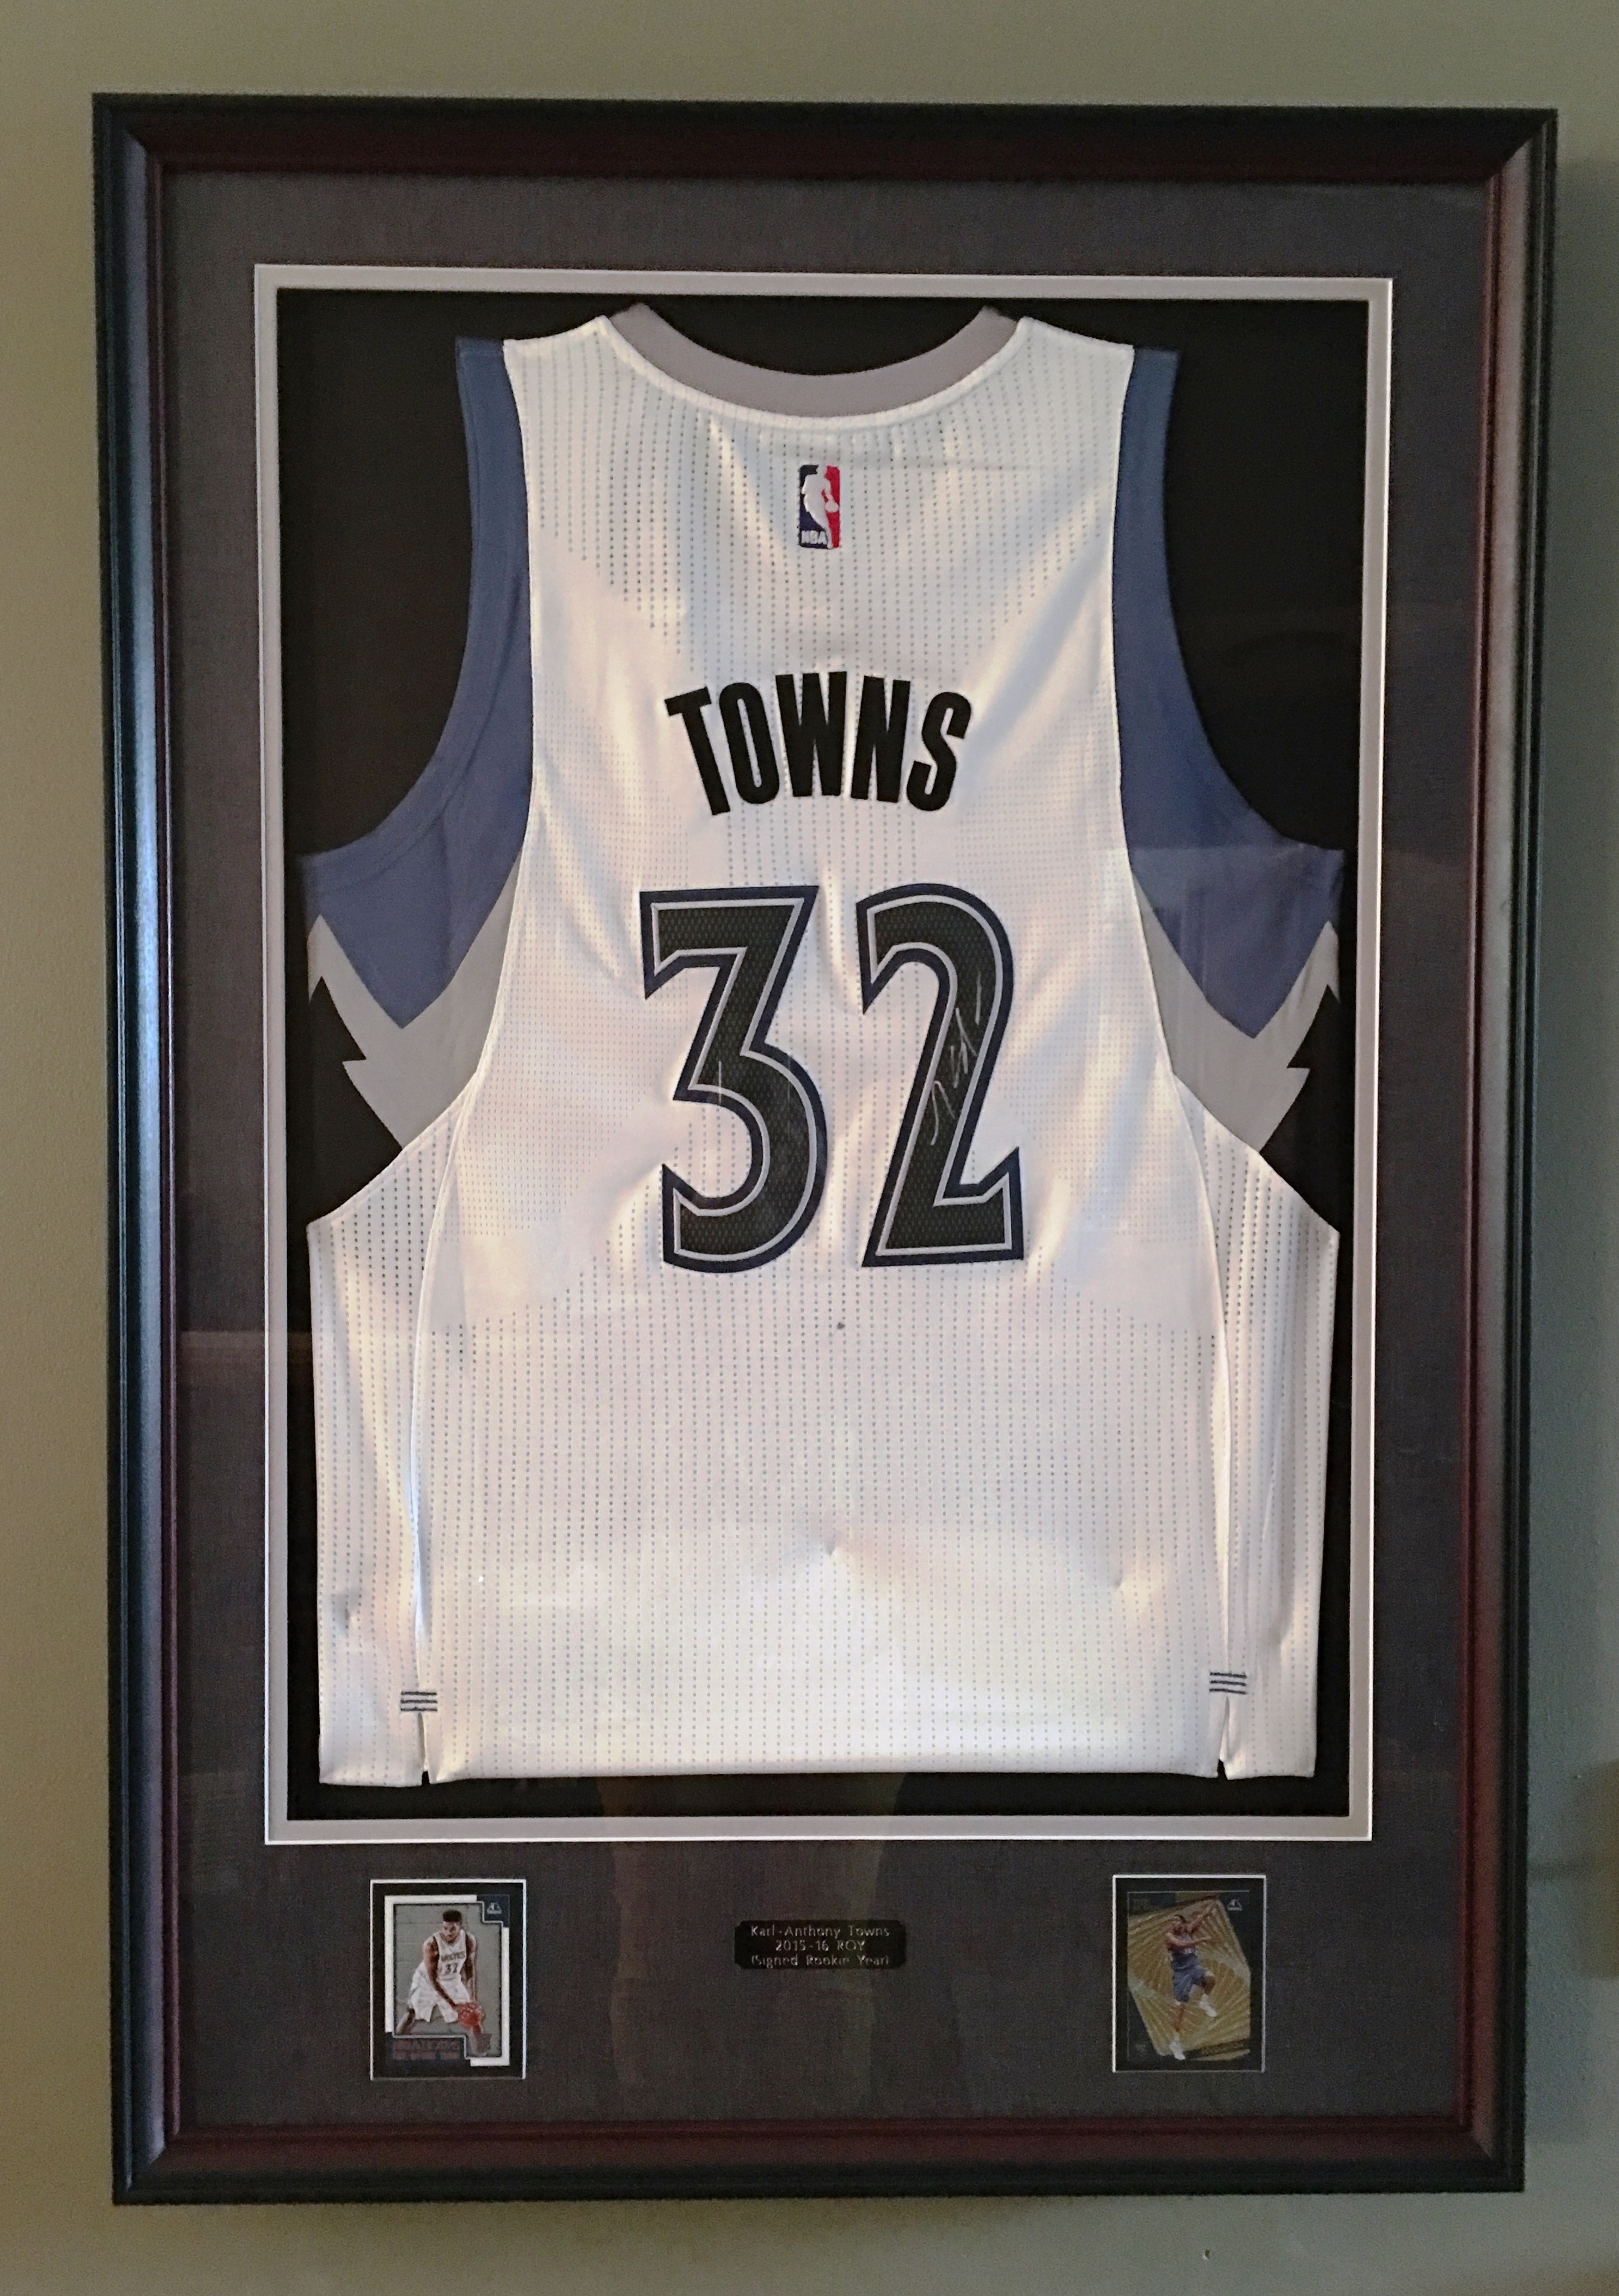 karl anthony towns jersey